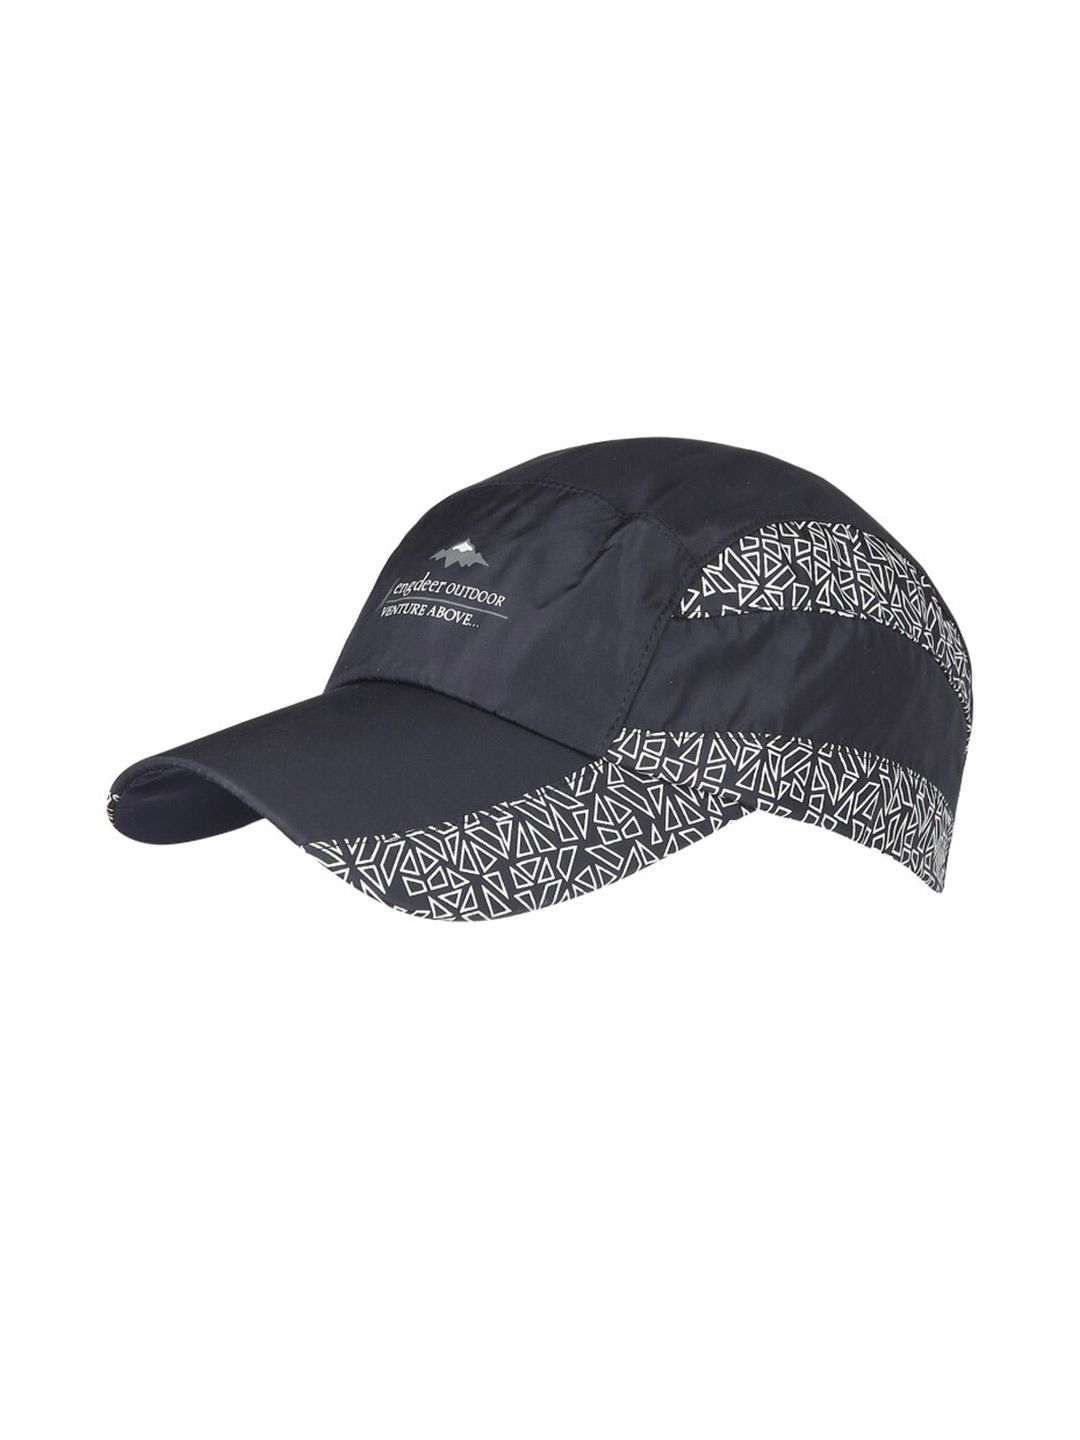 iSWEVEN Unisex Navy Blue & White Printed Snapback Cap Price in India